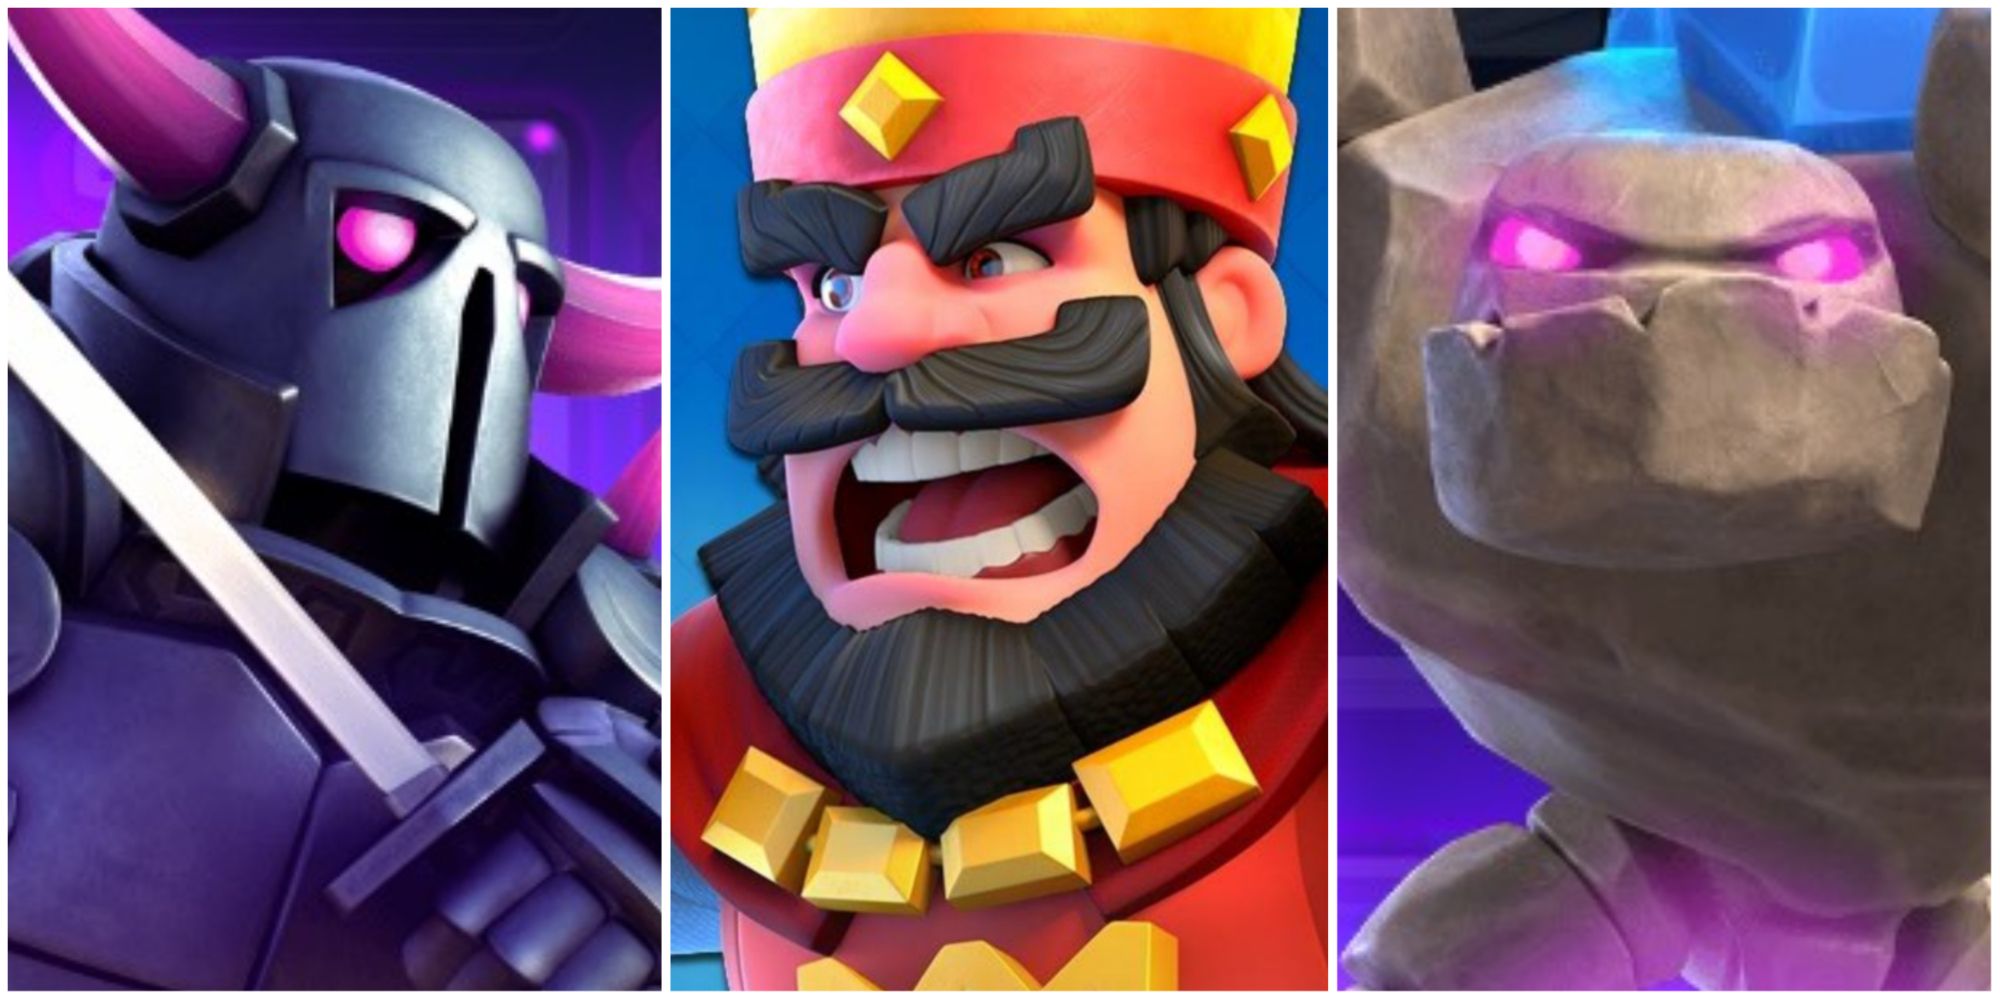 Clash Royale Man with P.E.K.K.A and Golem